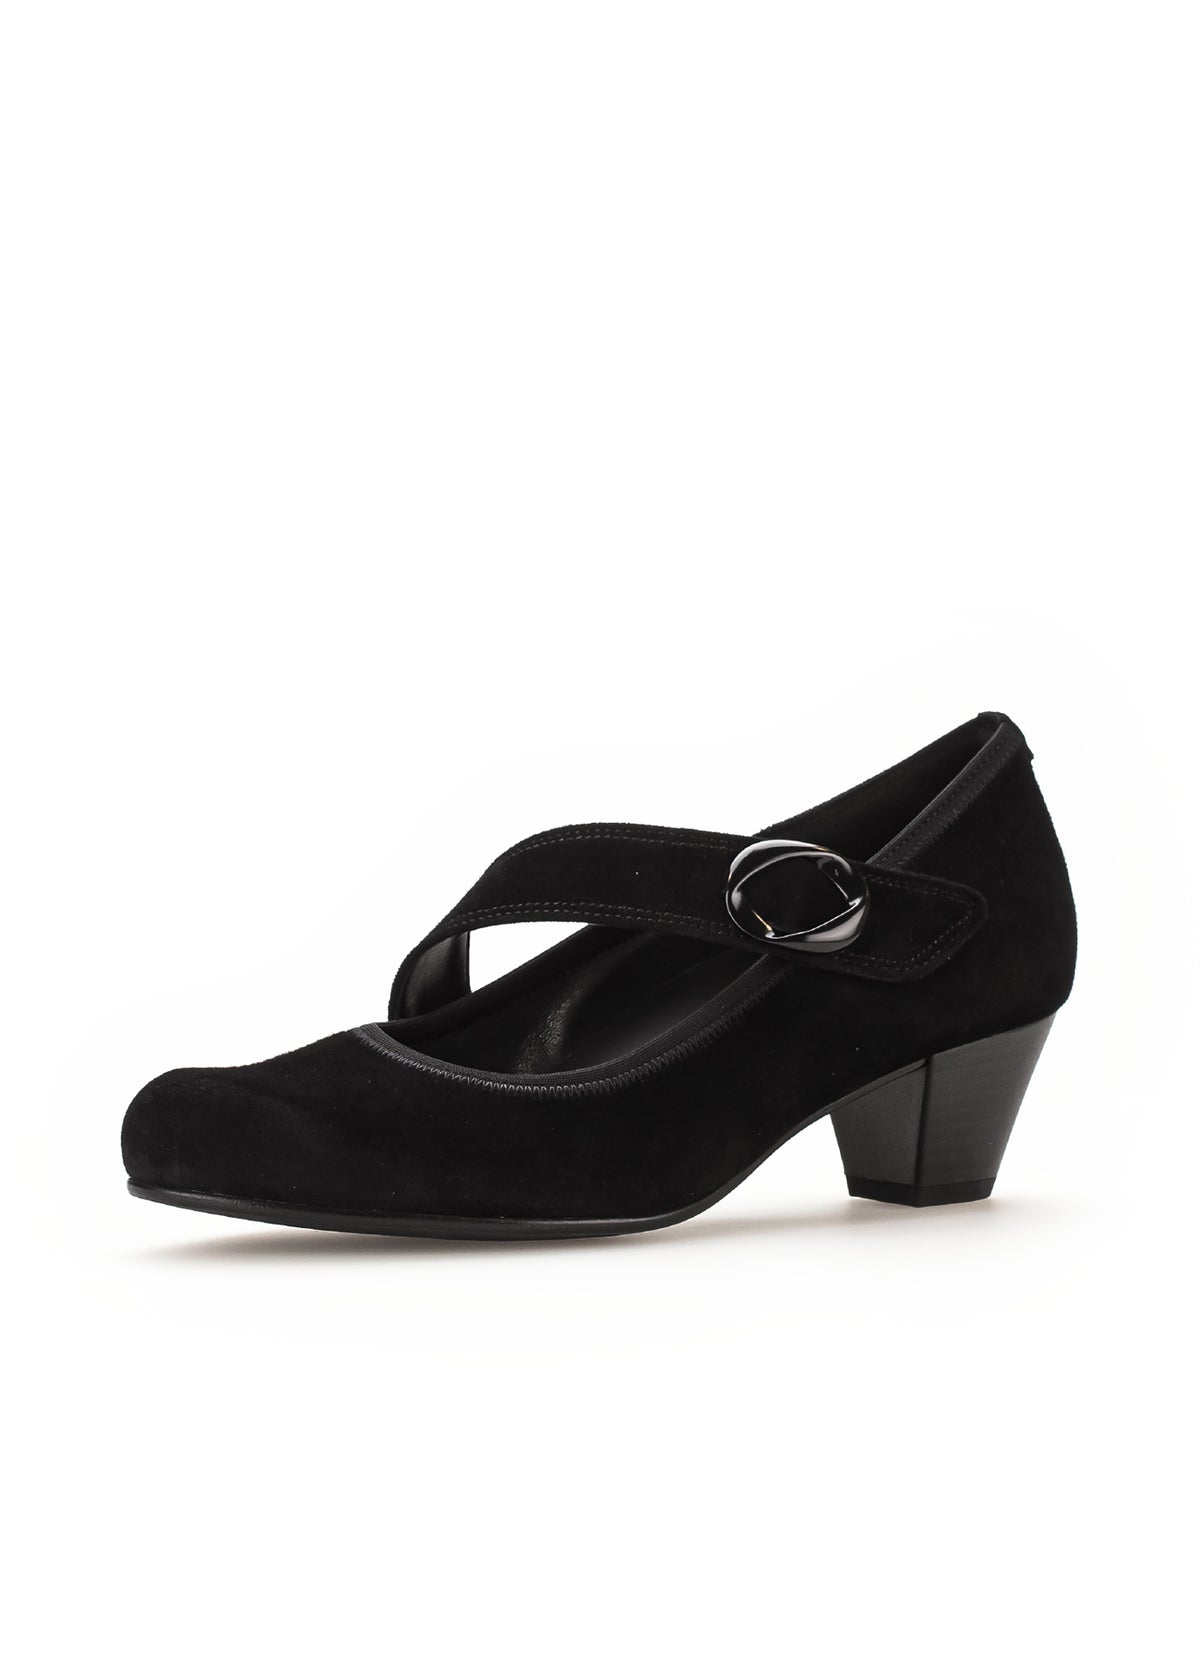 Open-toed shoes with velcro straps - black